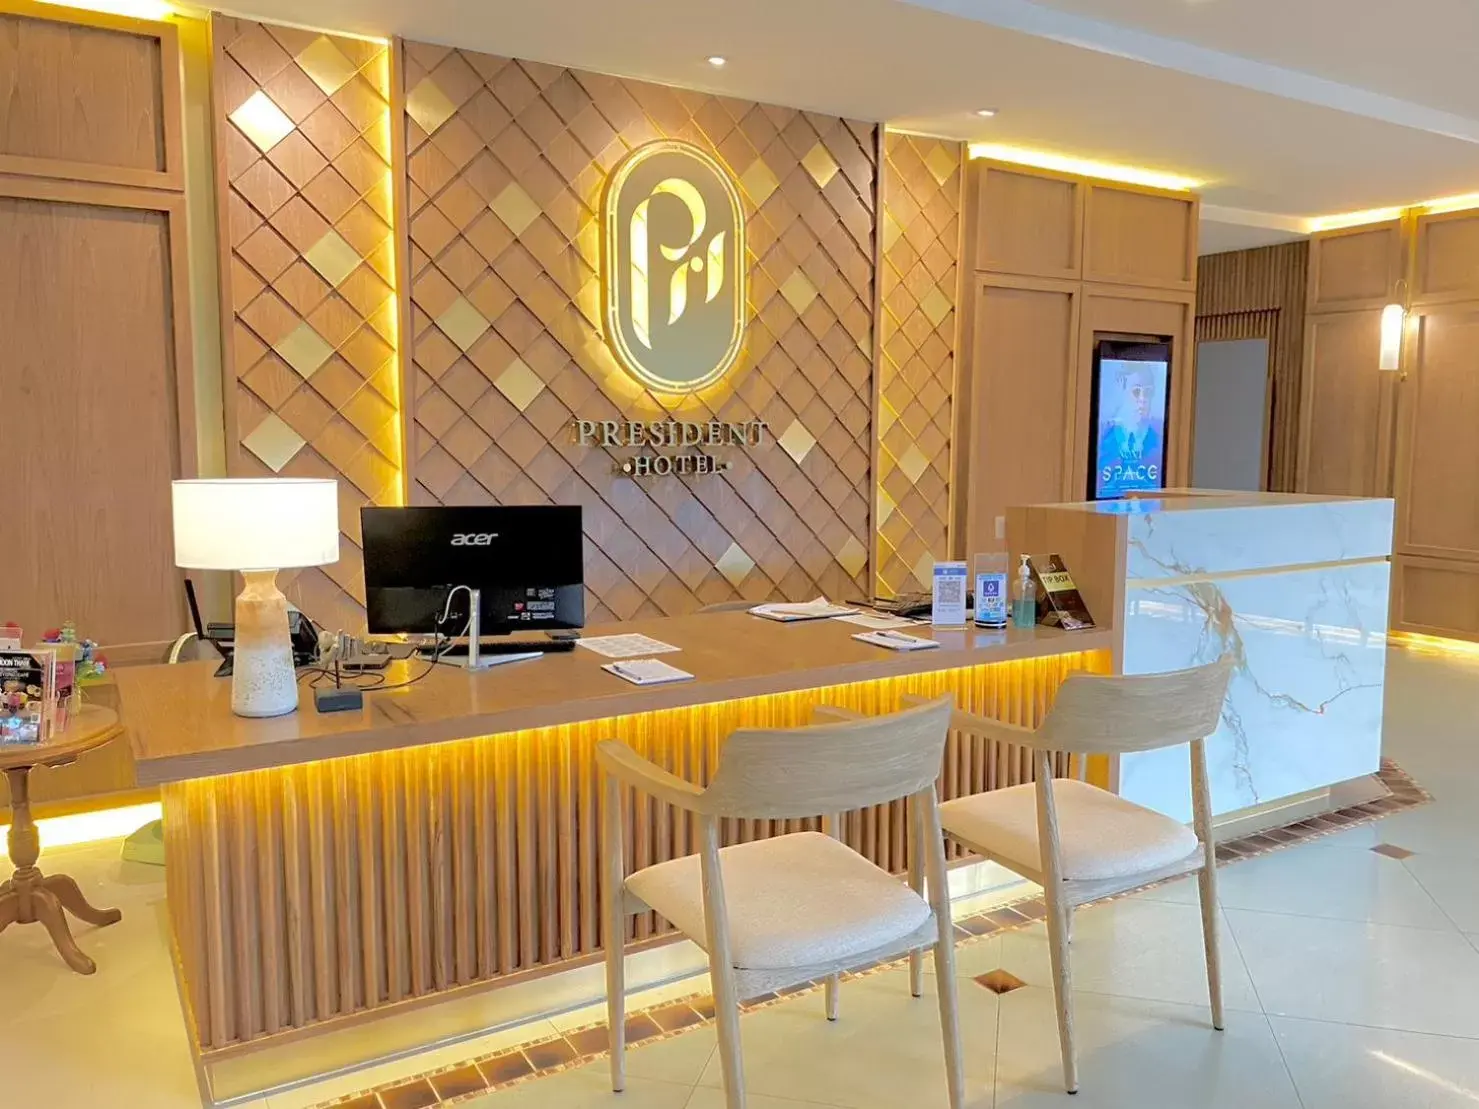 Lobby or reception in President Hotel Udonthani